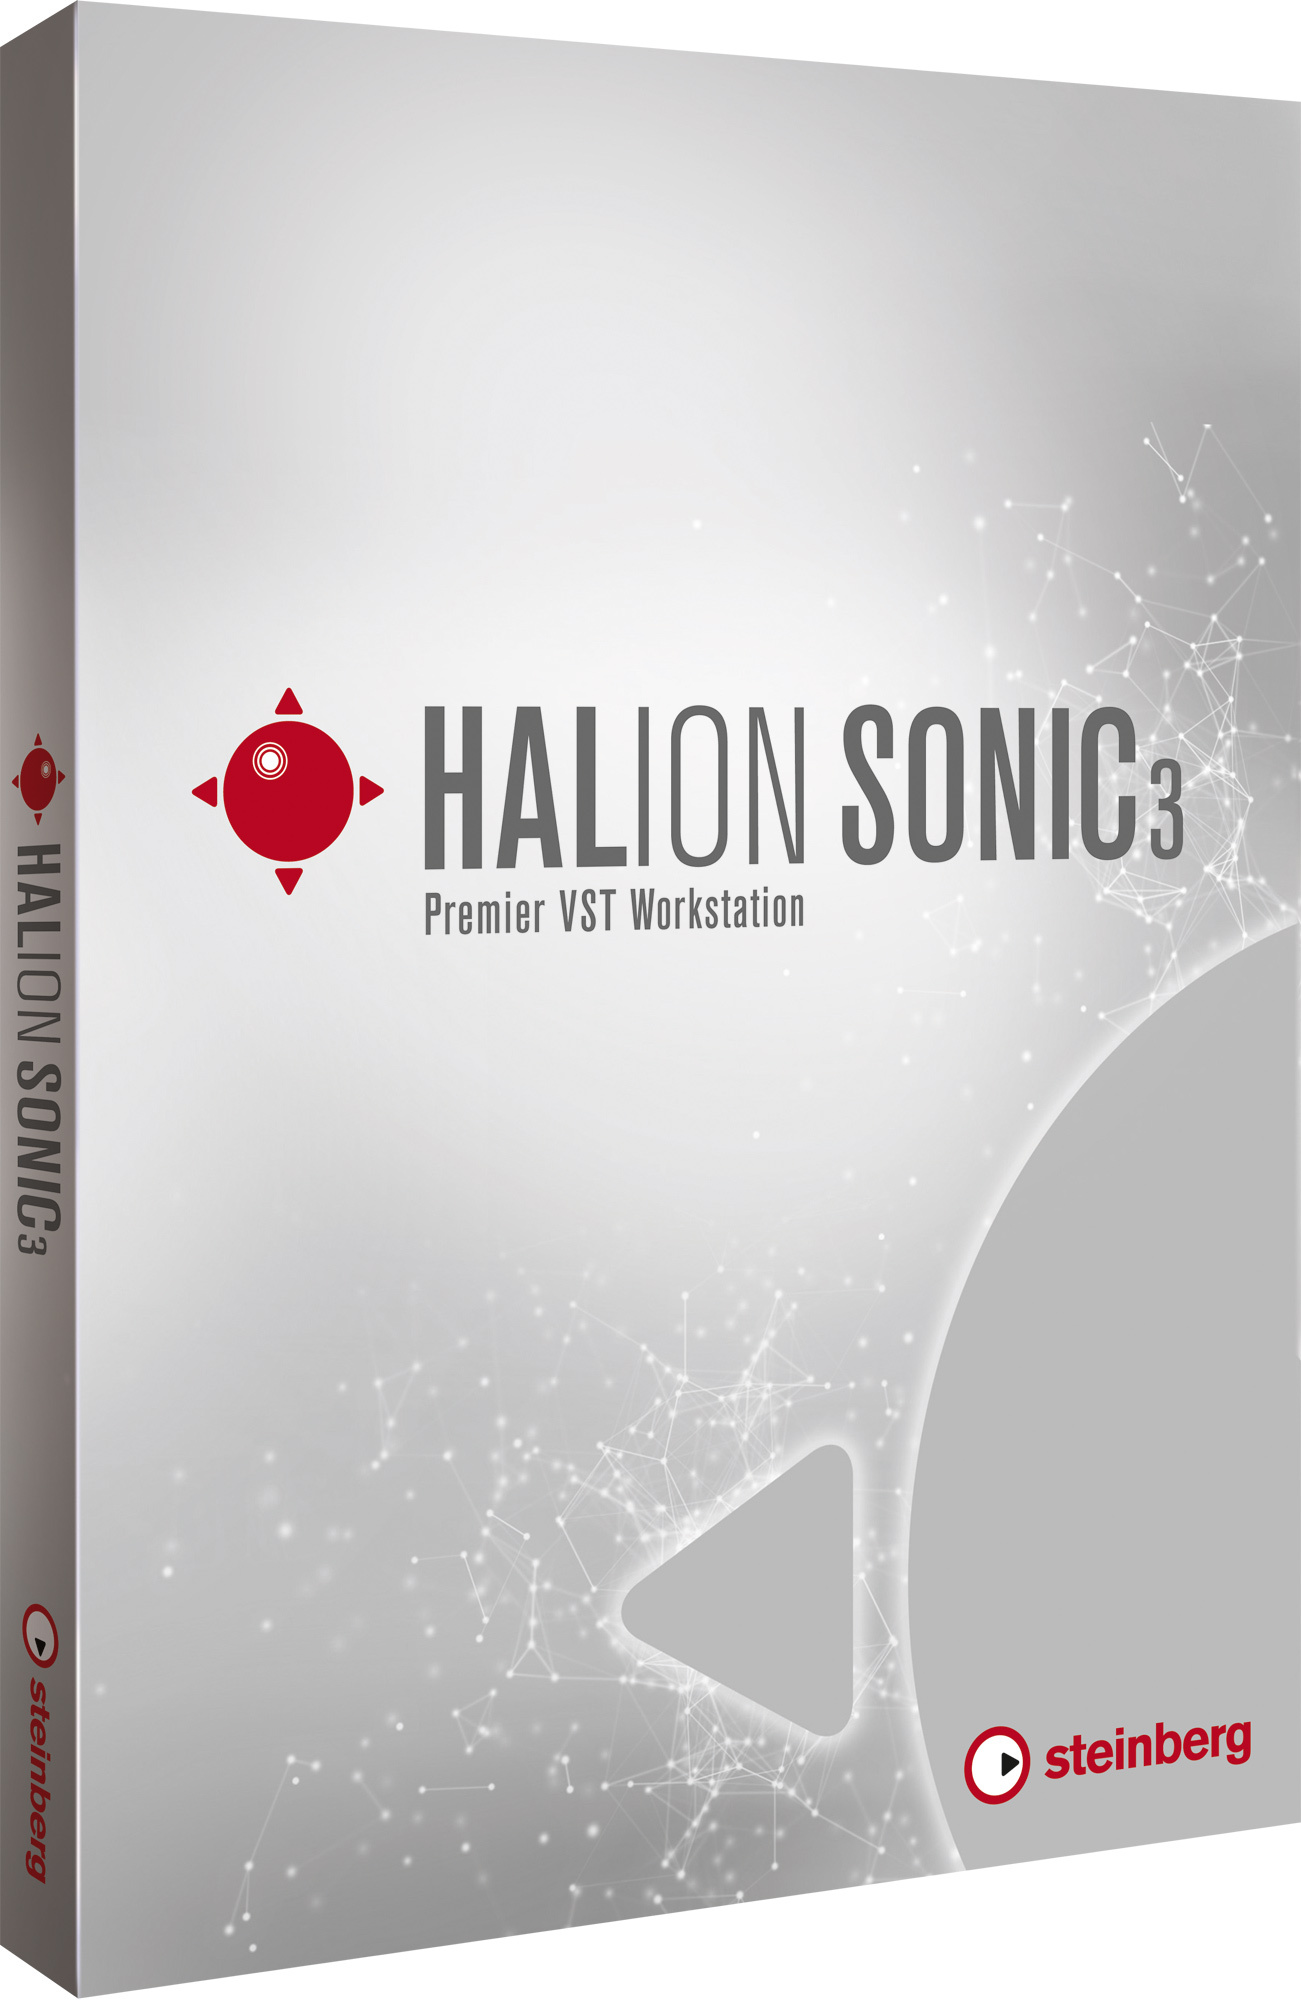 Steinberg Halion Sonic 3 - Sound bank - Main picture